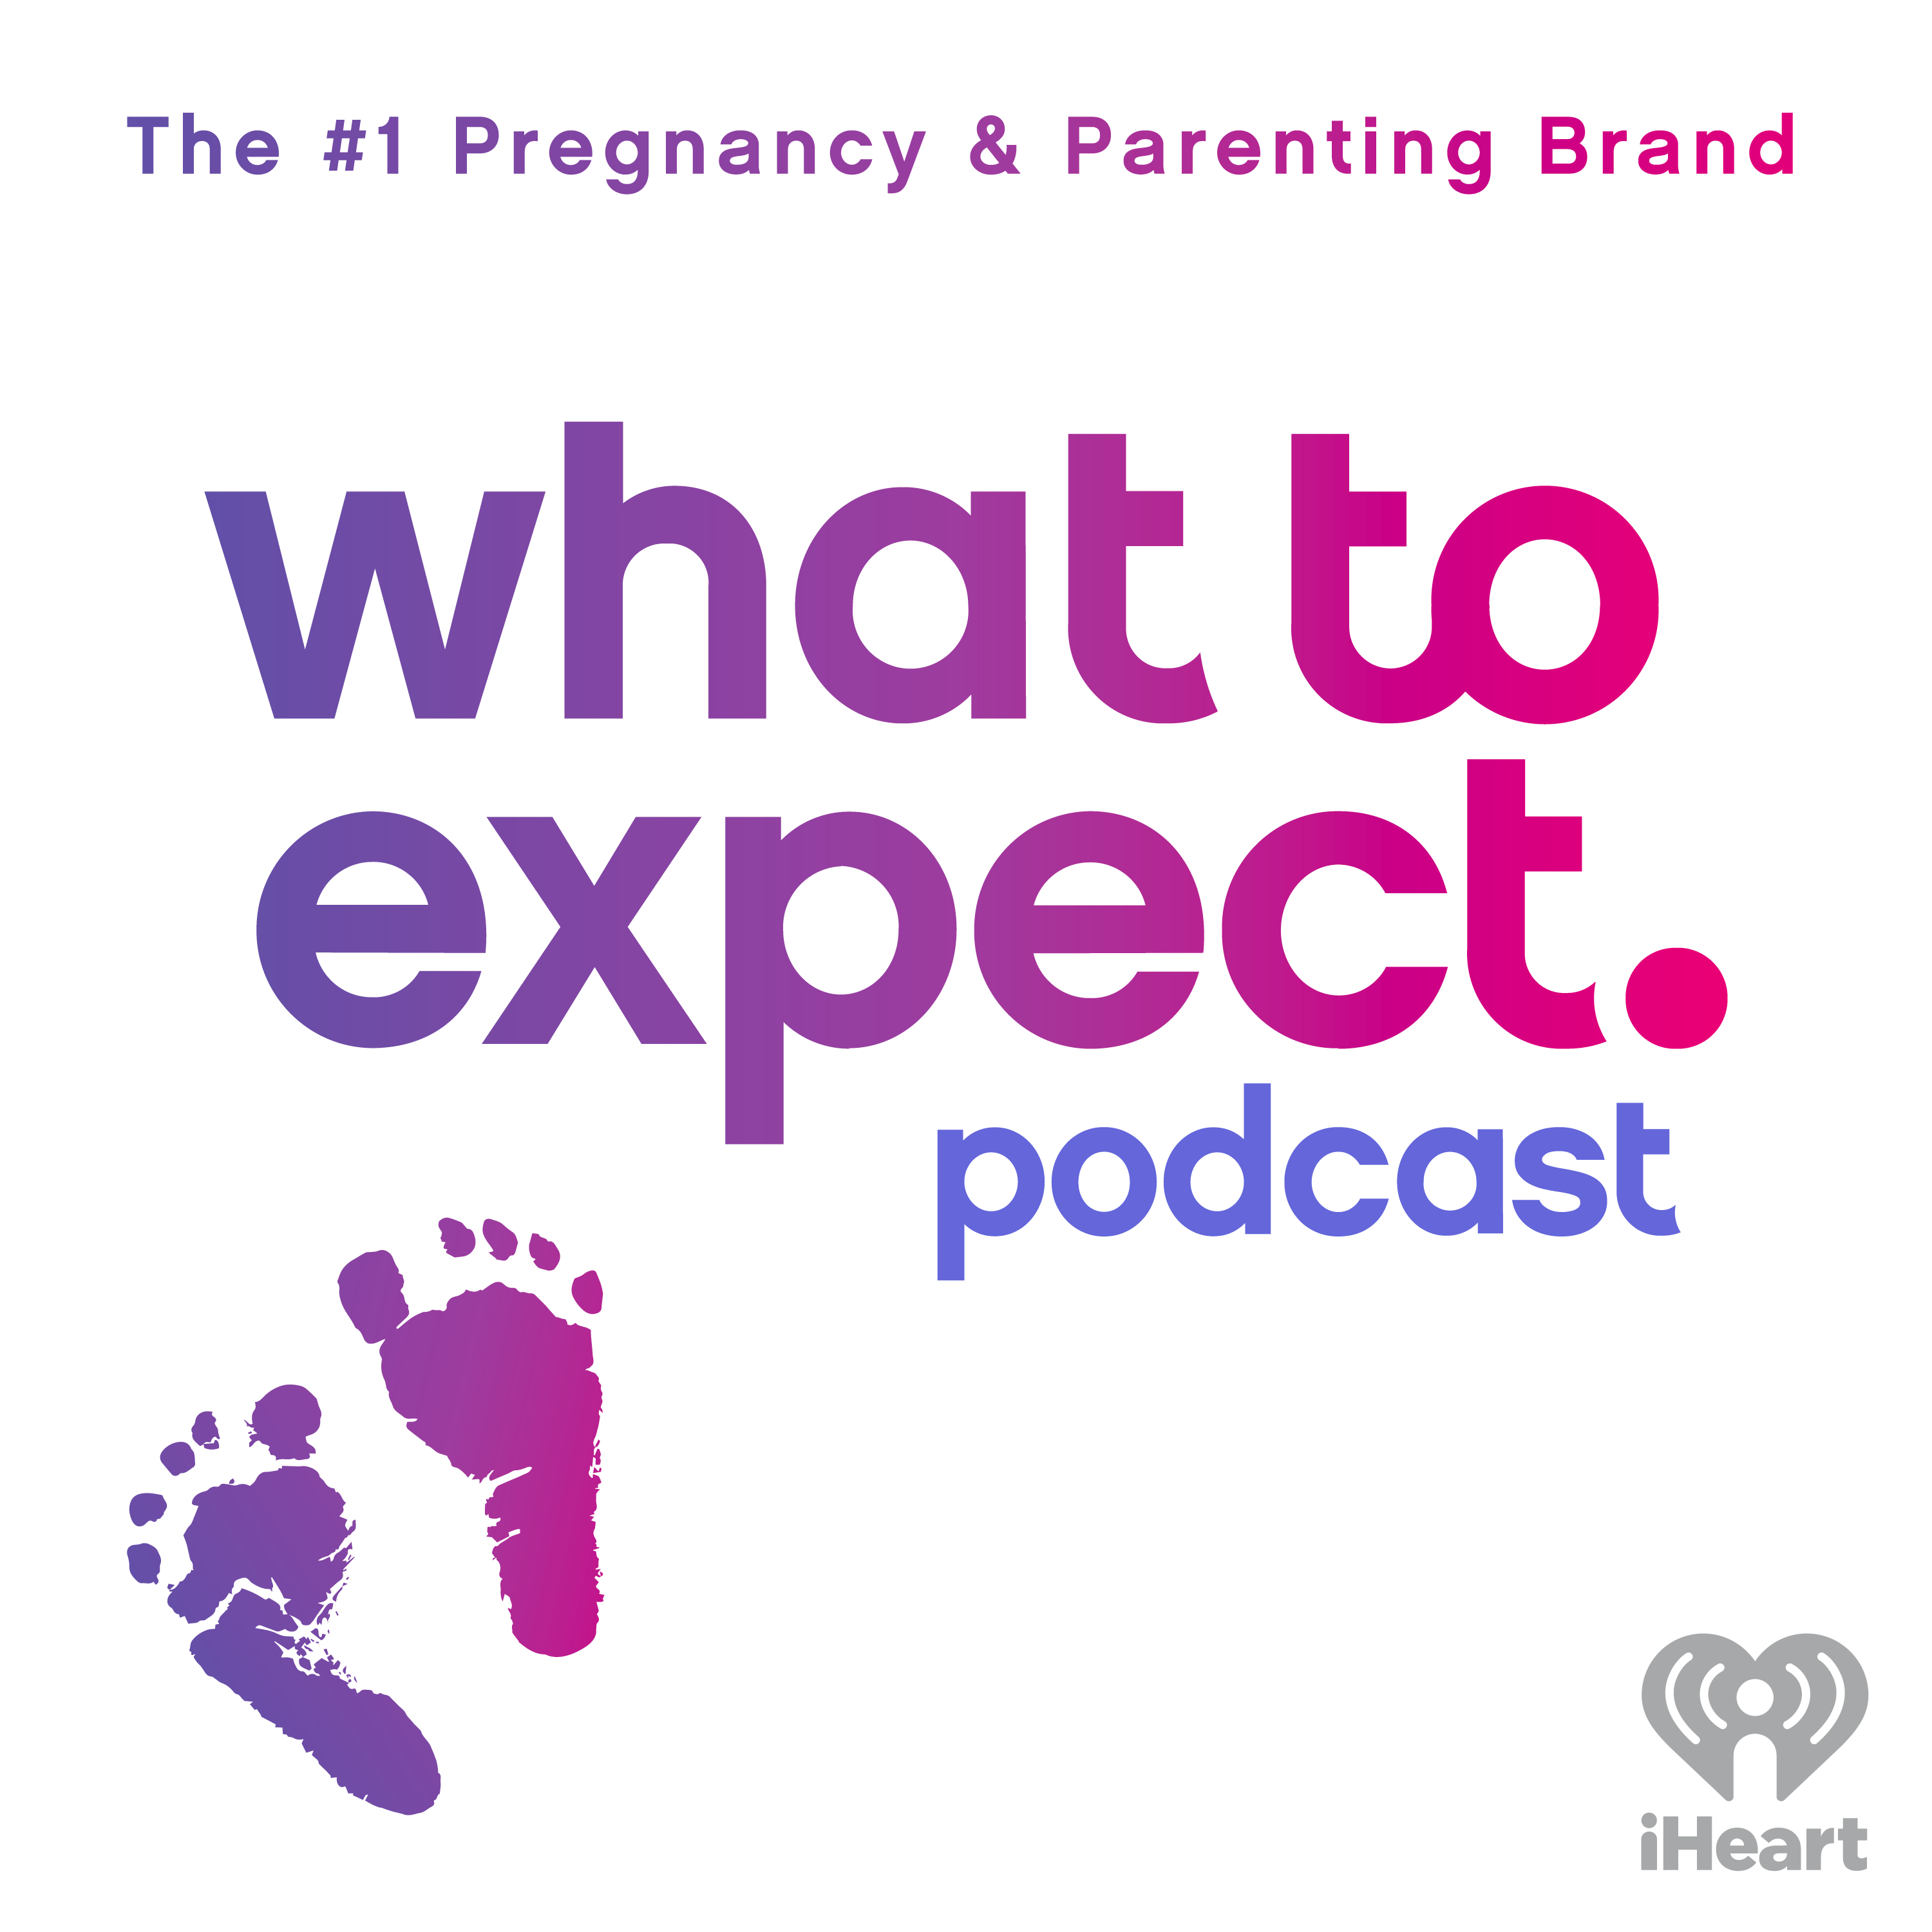 Leslie Odom Jr. and Nicolette Robinson on Pregnancy and Parenting